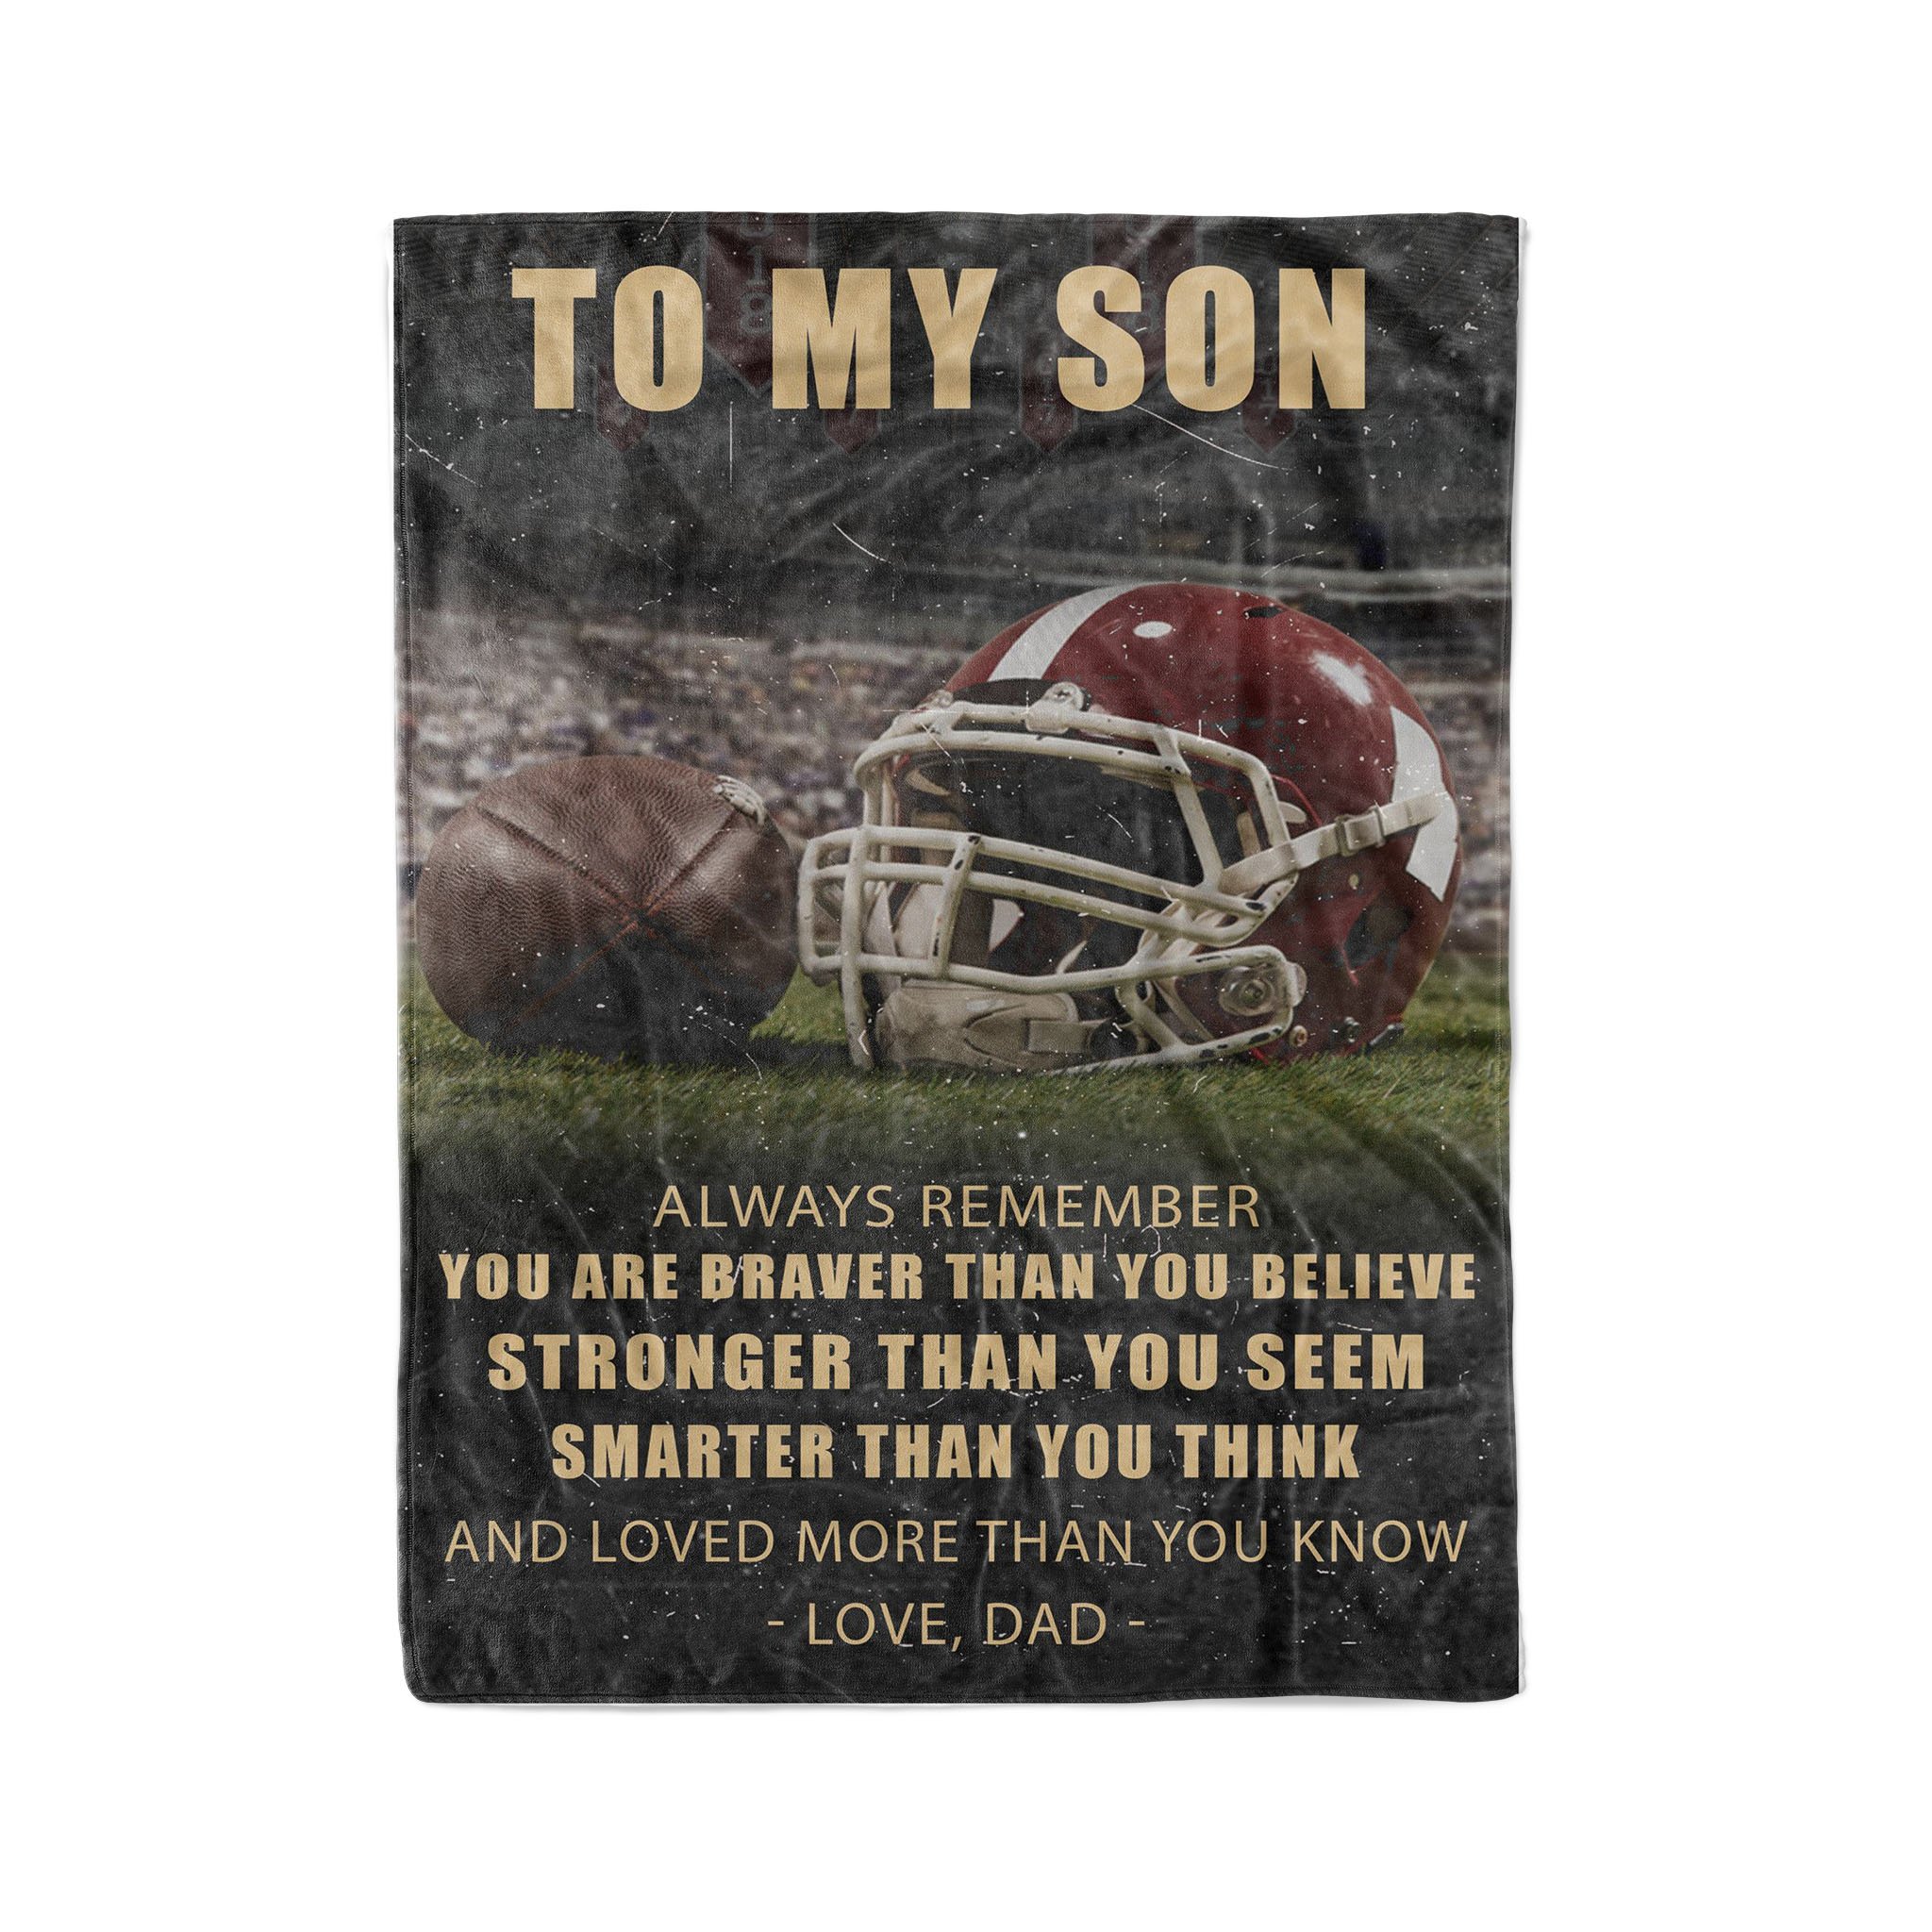 Fleece American football Blanket dadto son always remember you are braver than you believe